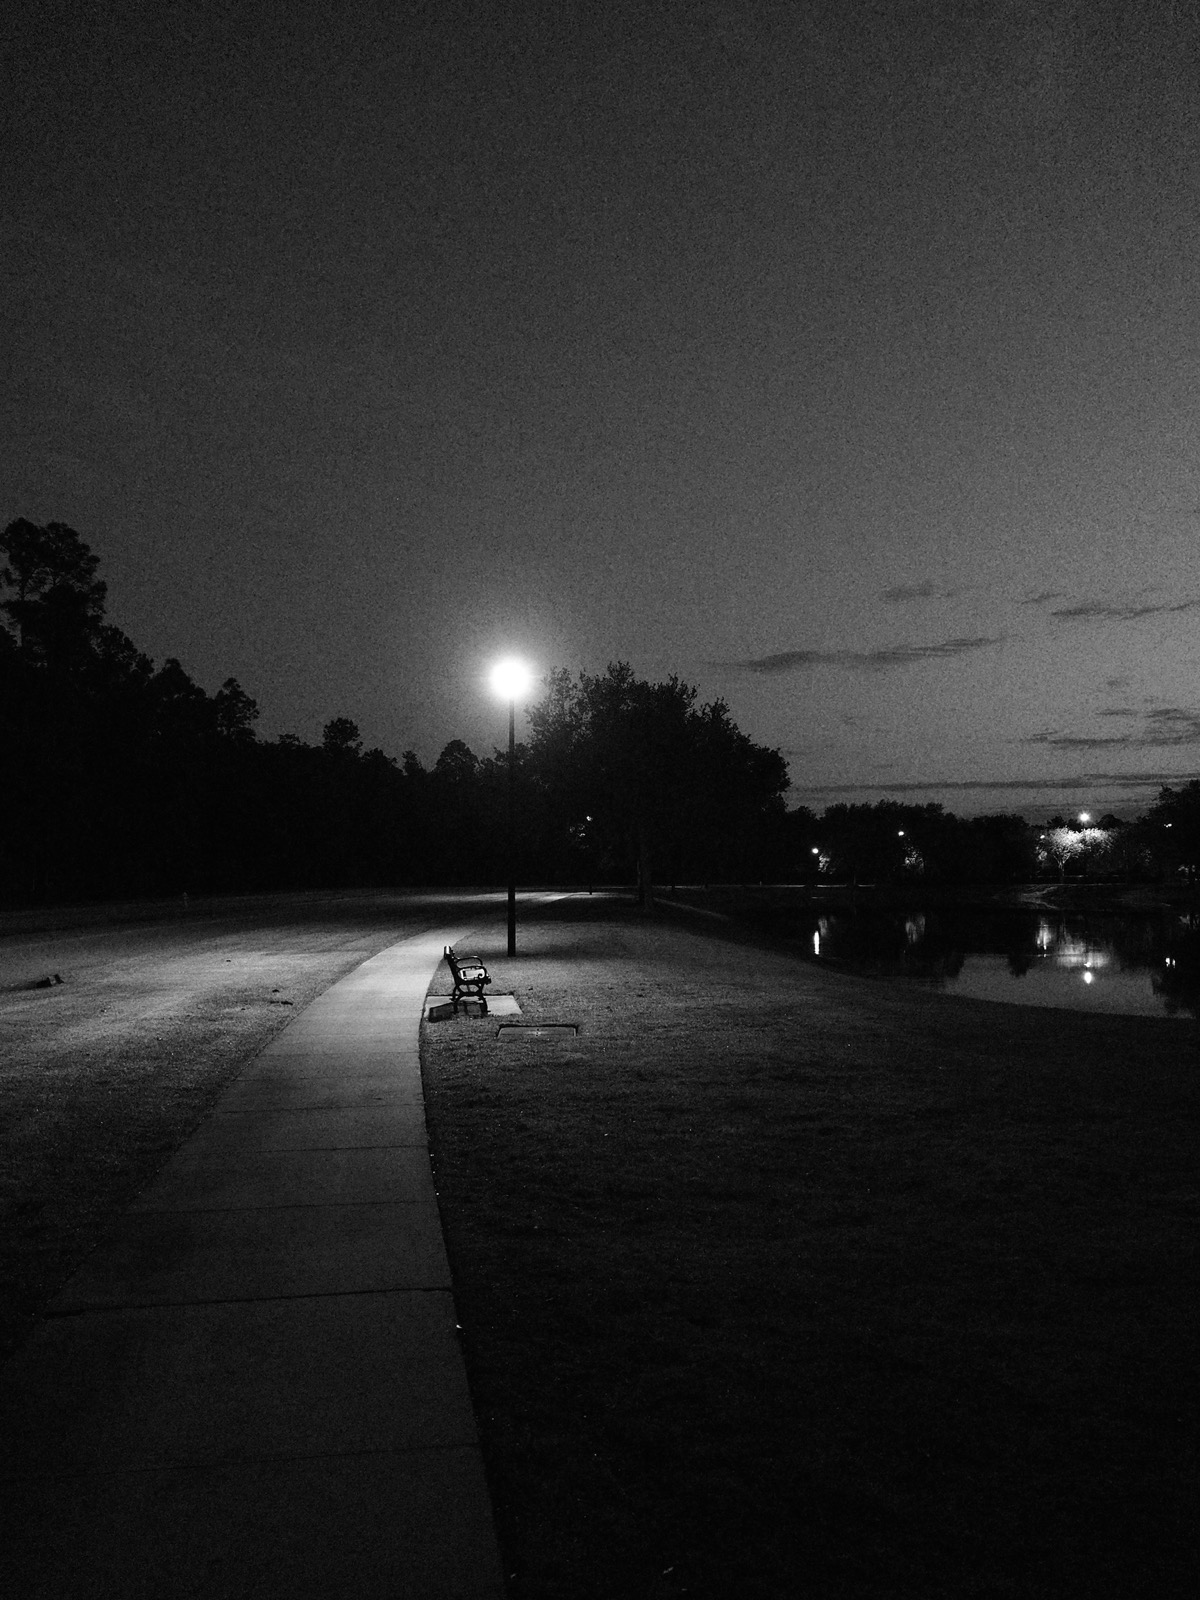 Grainy black and white image of an empty bench illuminated by a street lamp against the morning twilight